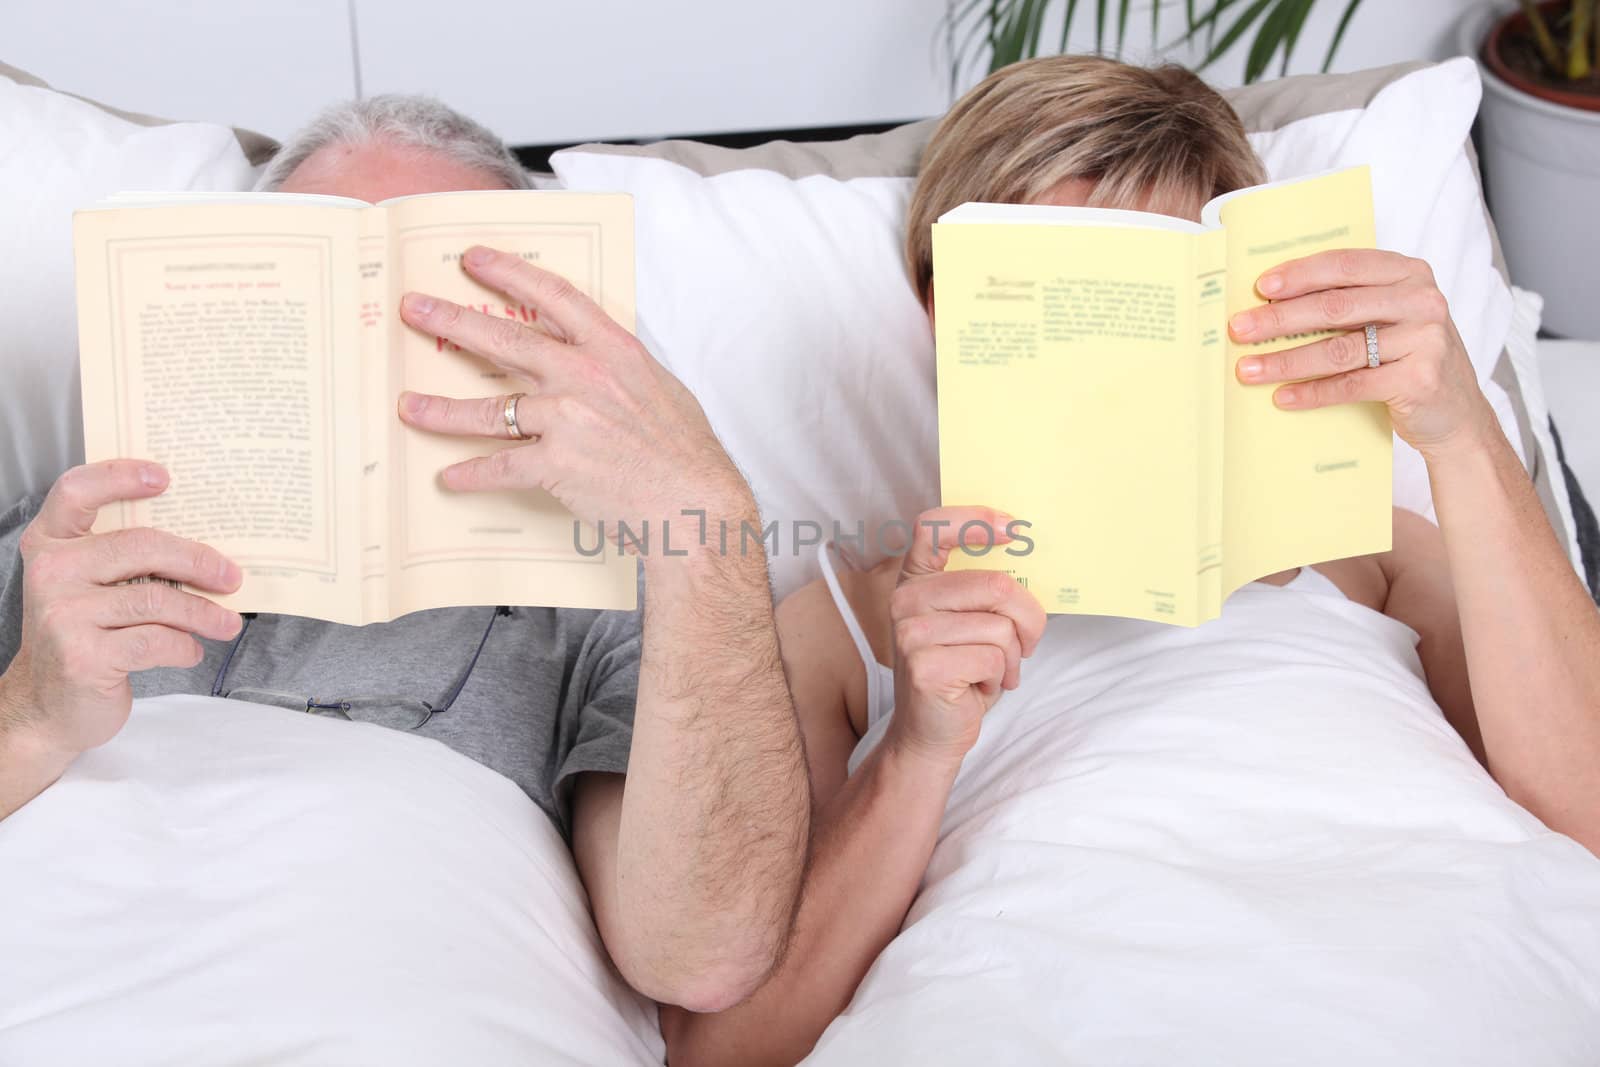 Couple reading together in bed by phovoir